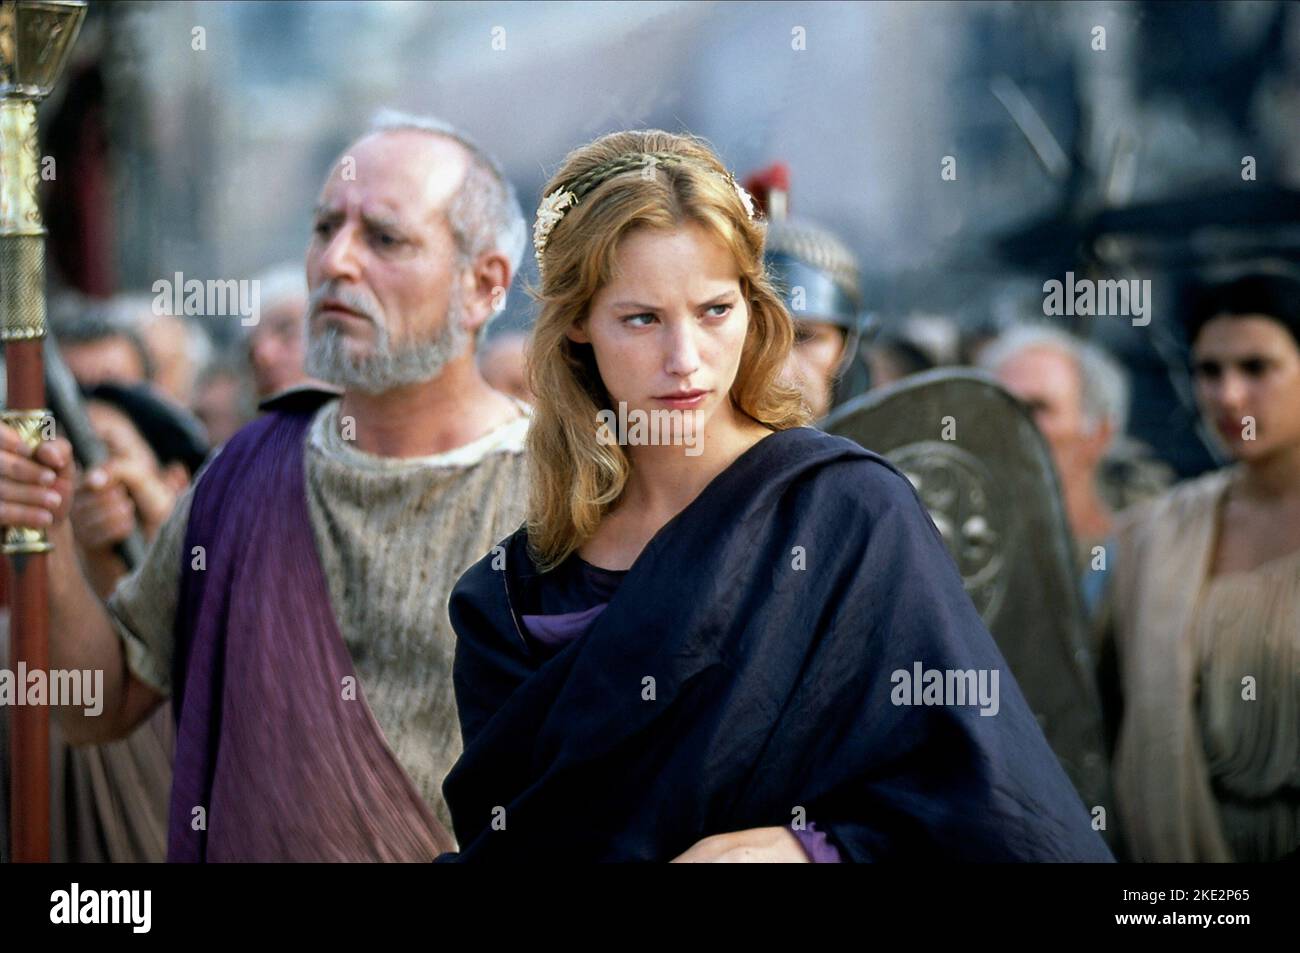 HELEN OF TROY, SIENNA GUILLORY, 2003 Stock Photo